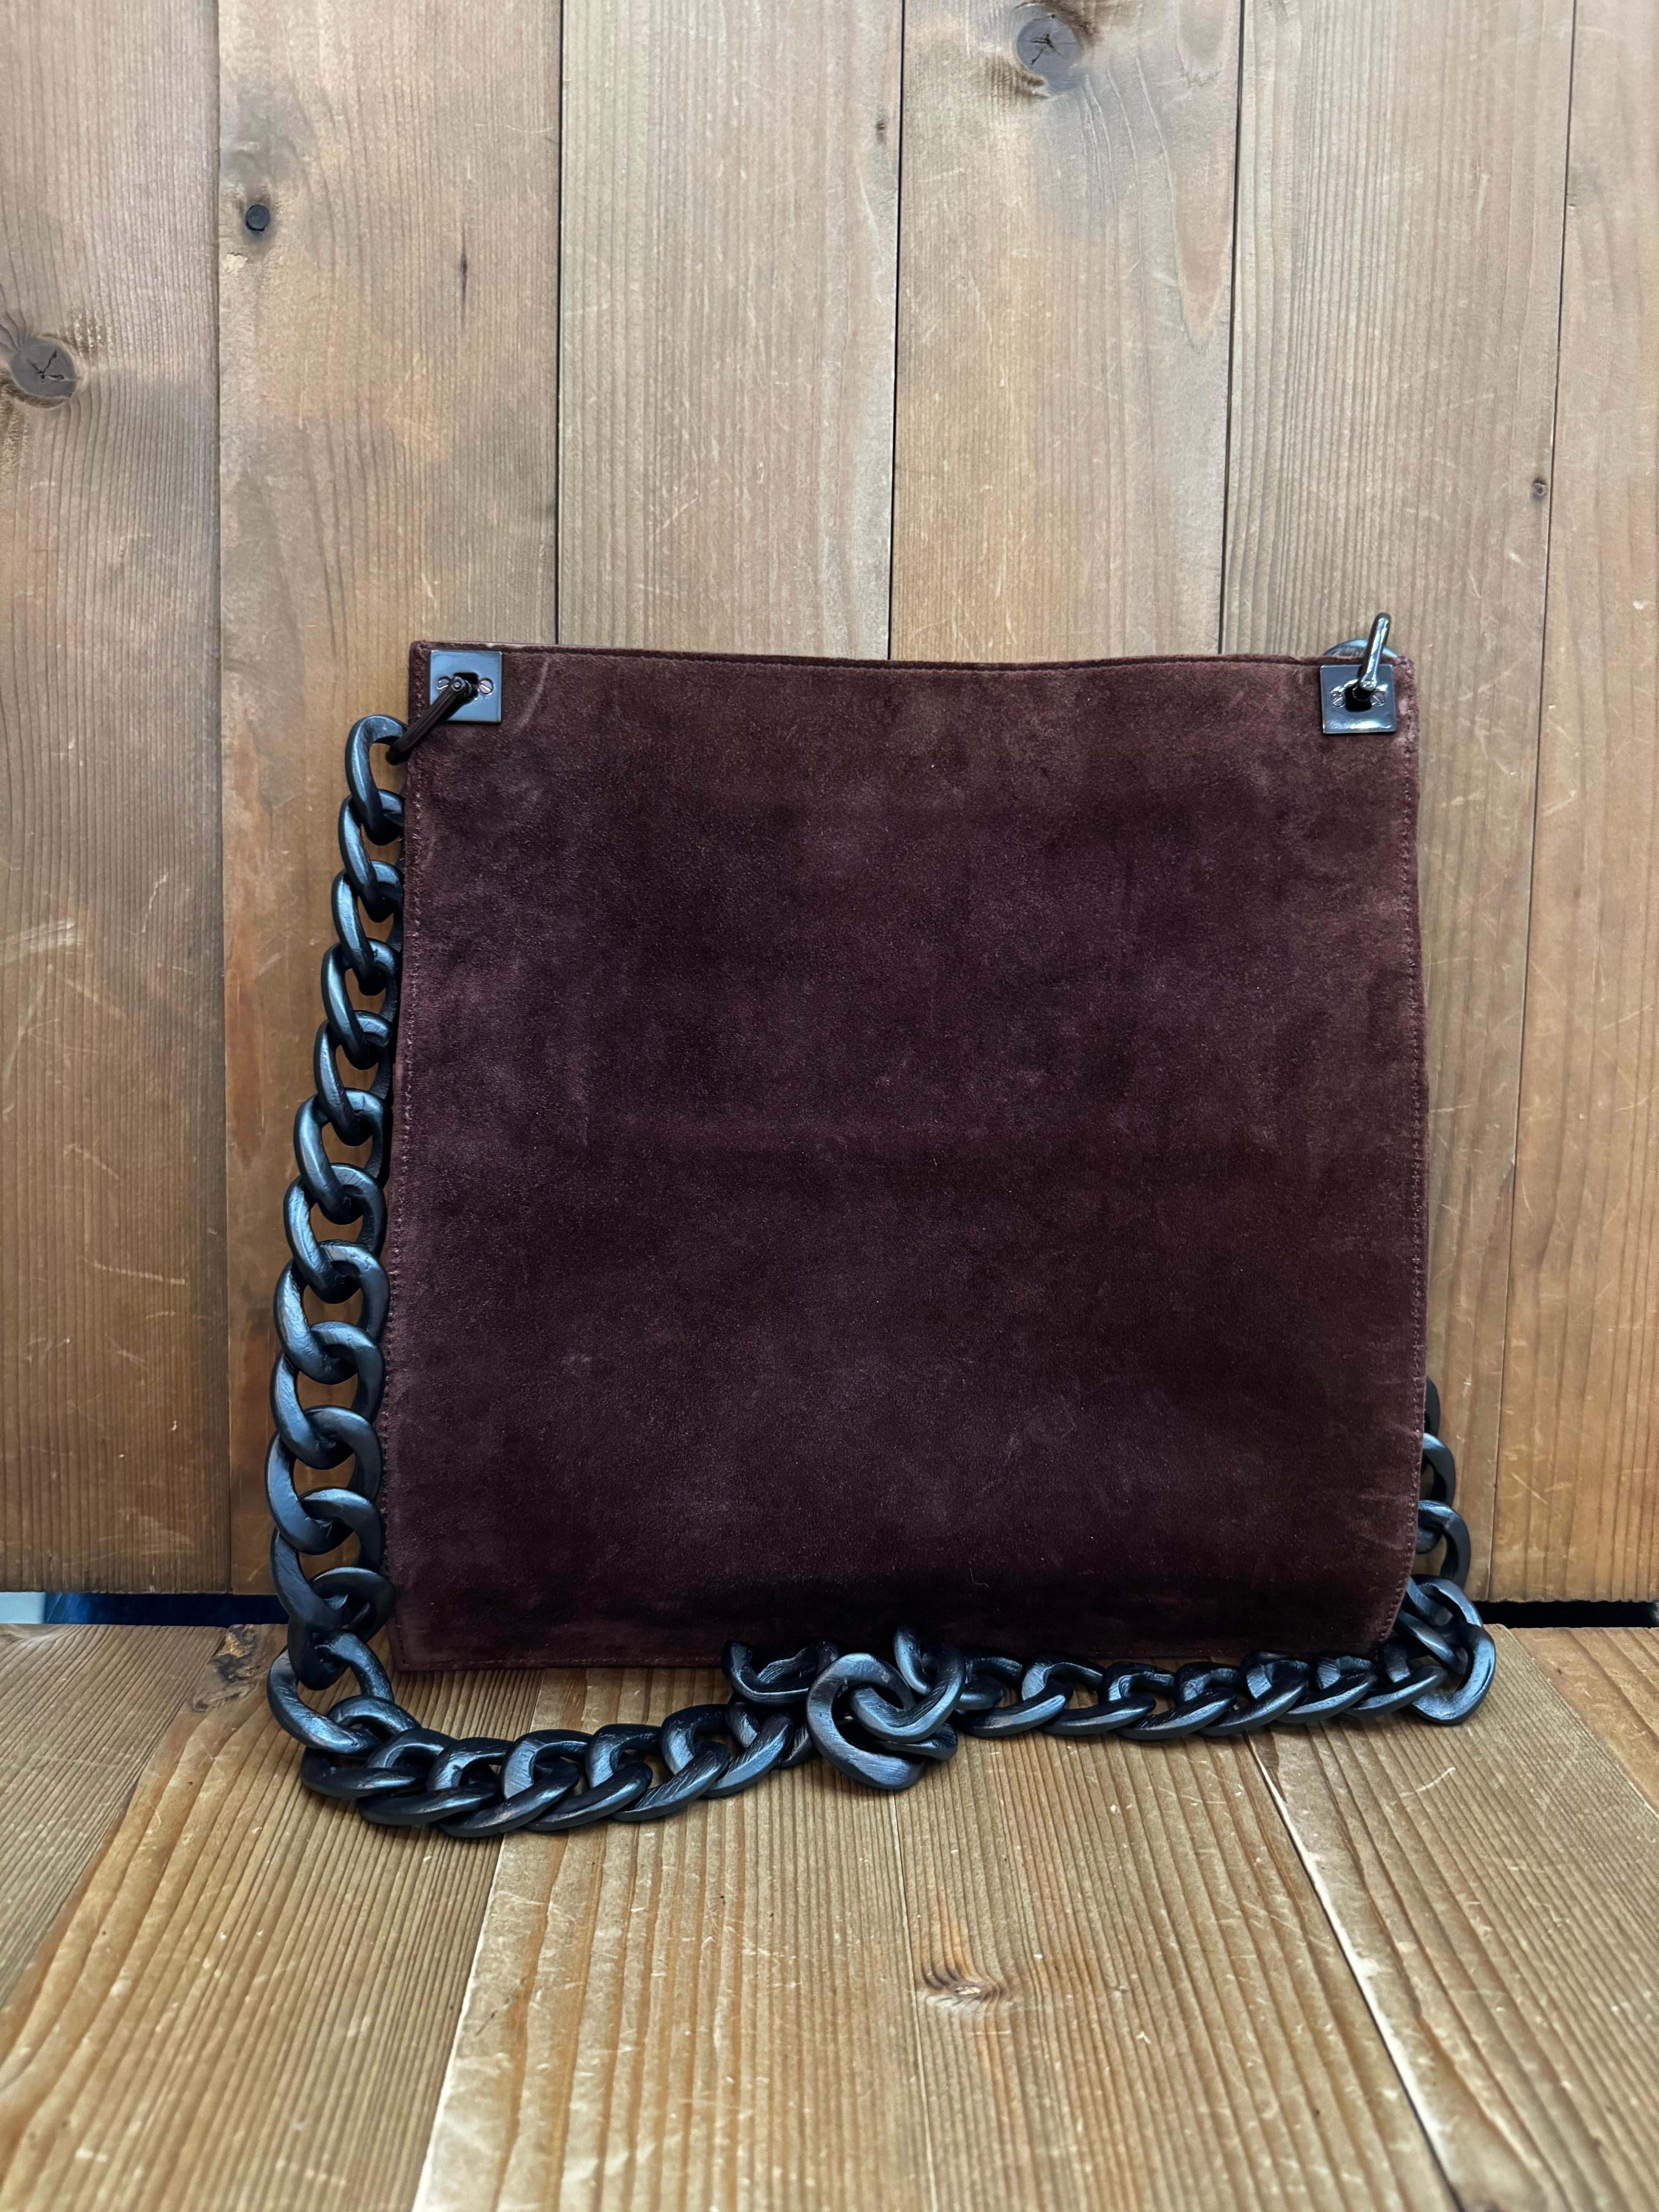 2000s Vintage GUCCI Nubuck Leather Flat Messenger Bag Brown Wood Chain In Fair Condition For Sale In Bangkok, TH